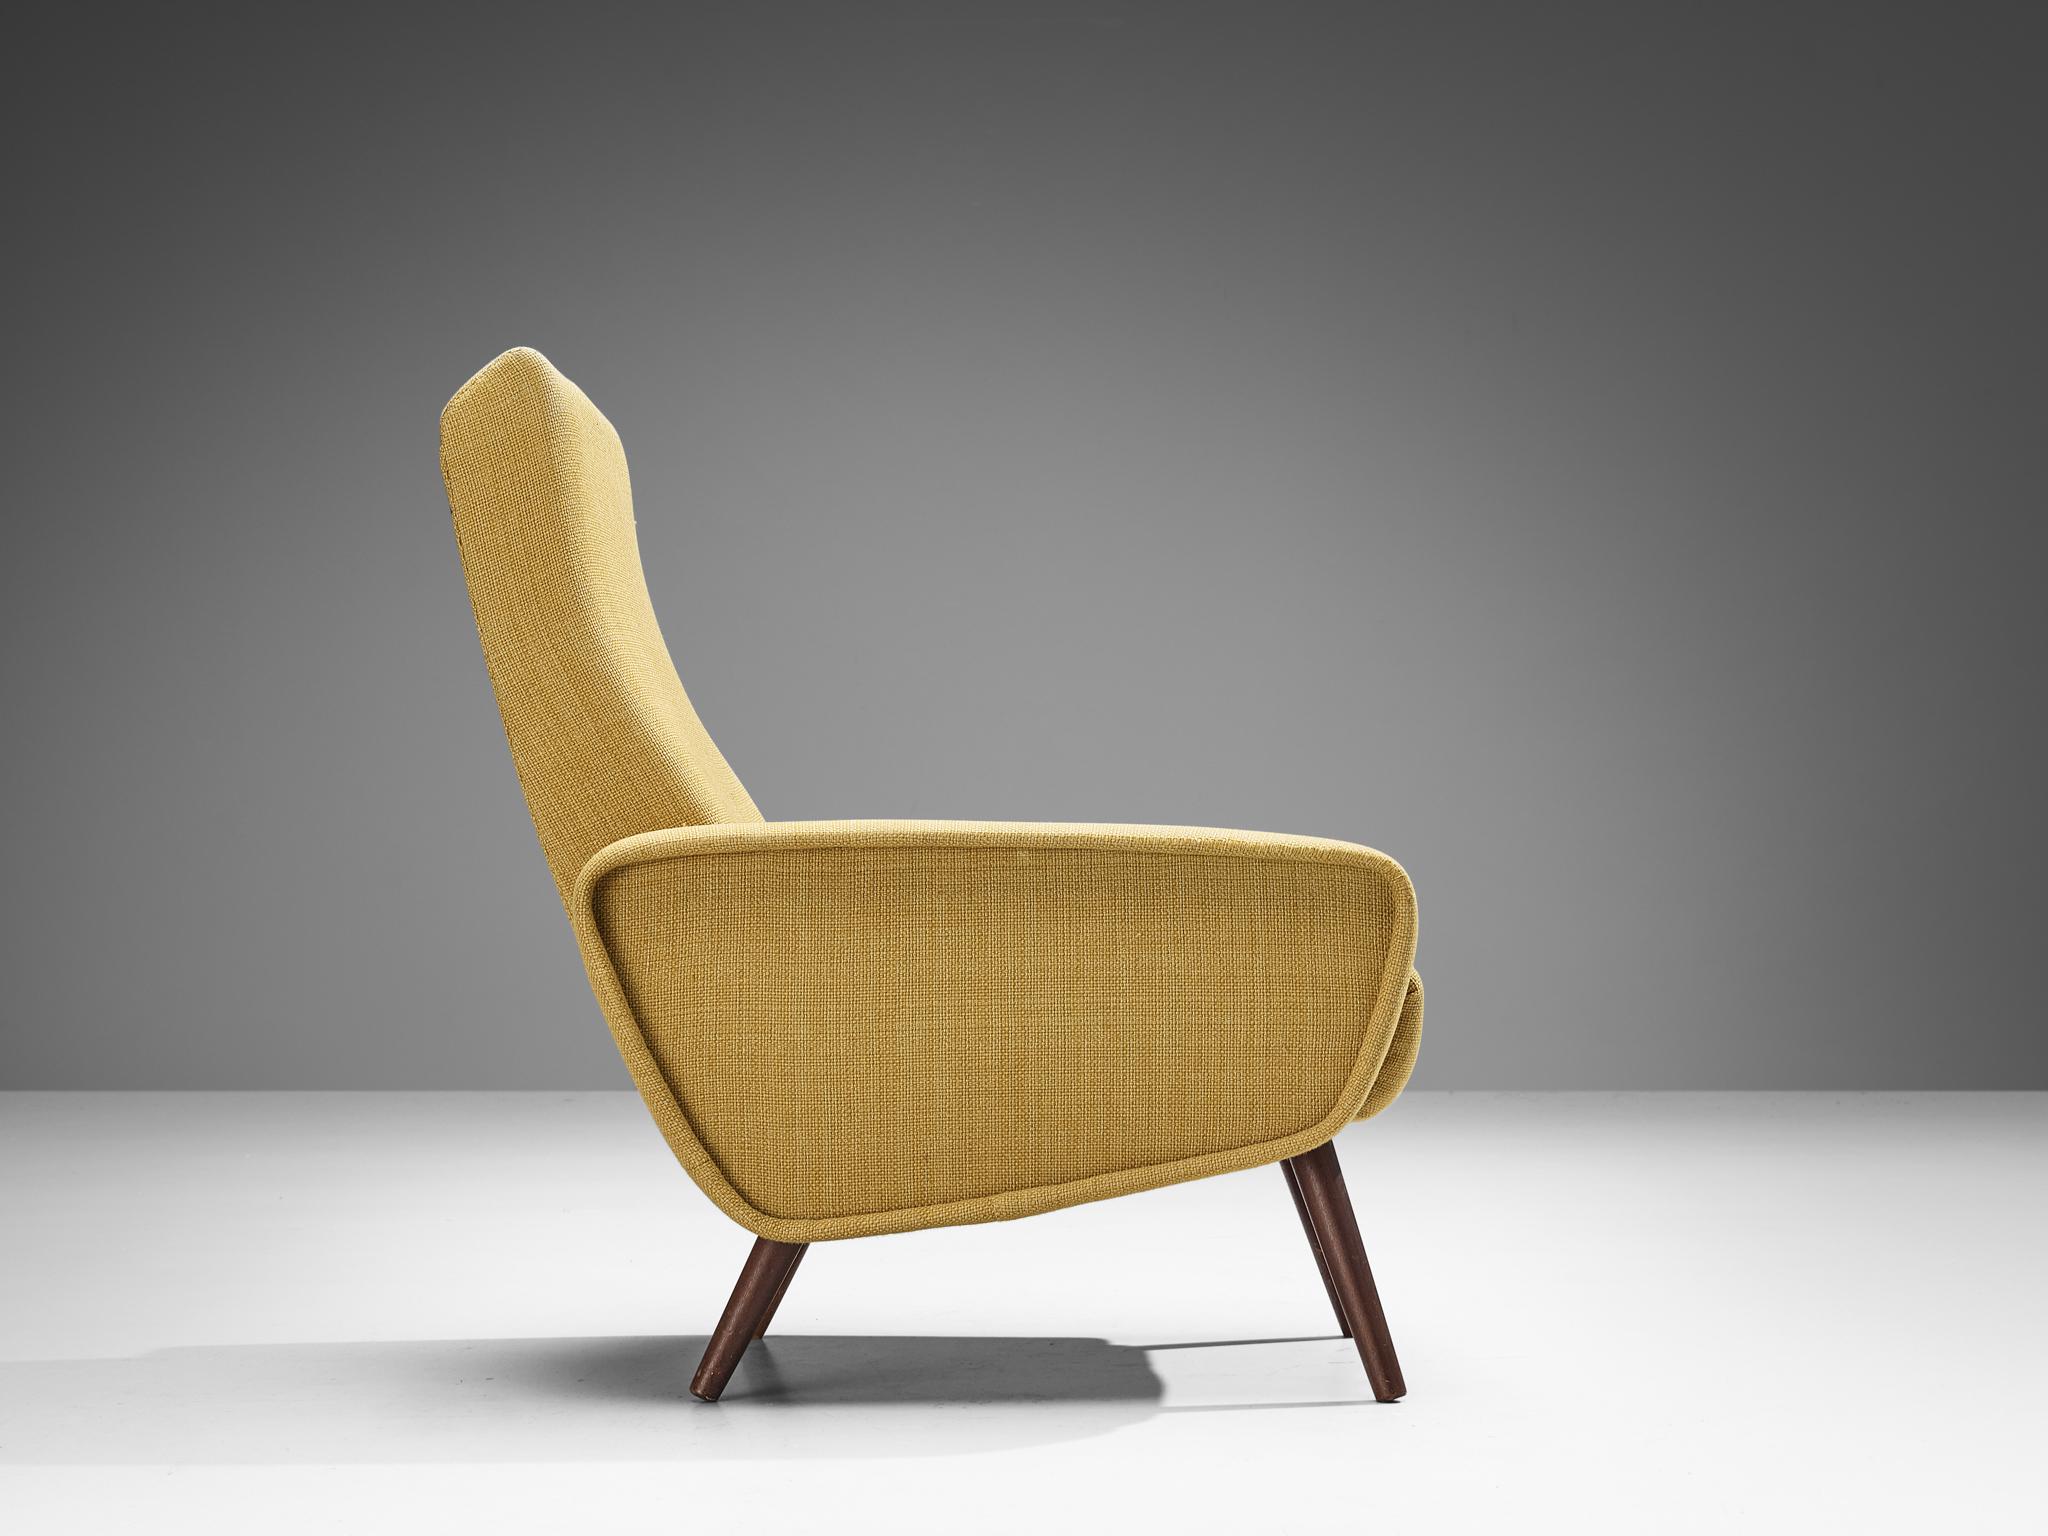 Mid-20th Century Italian Midcentury Lounge Chair in Mustard Yellow Upholstery For Sale